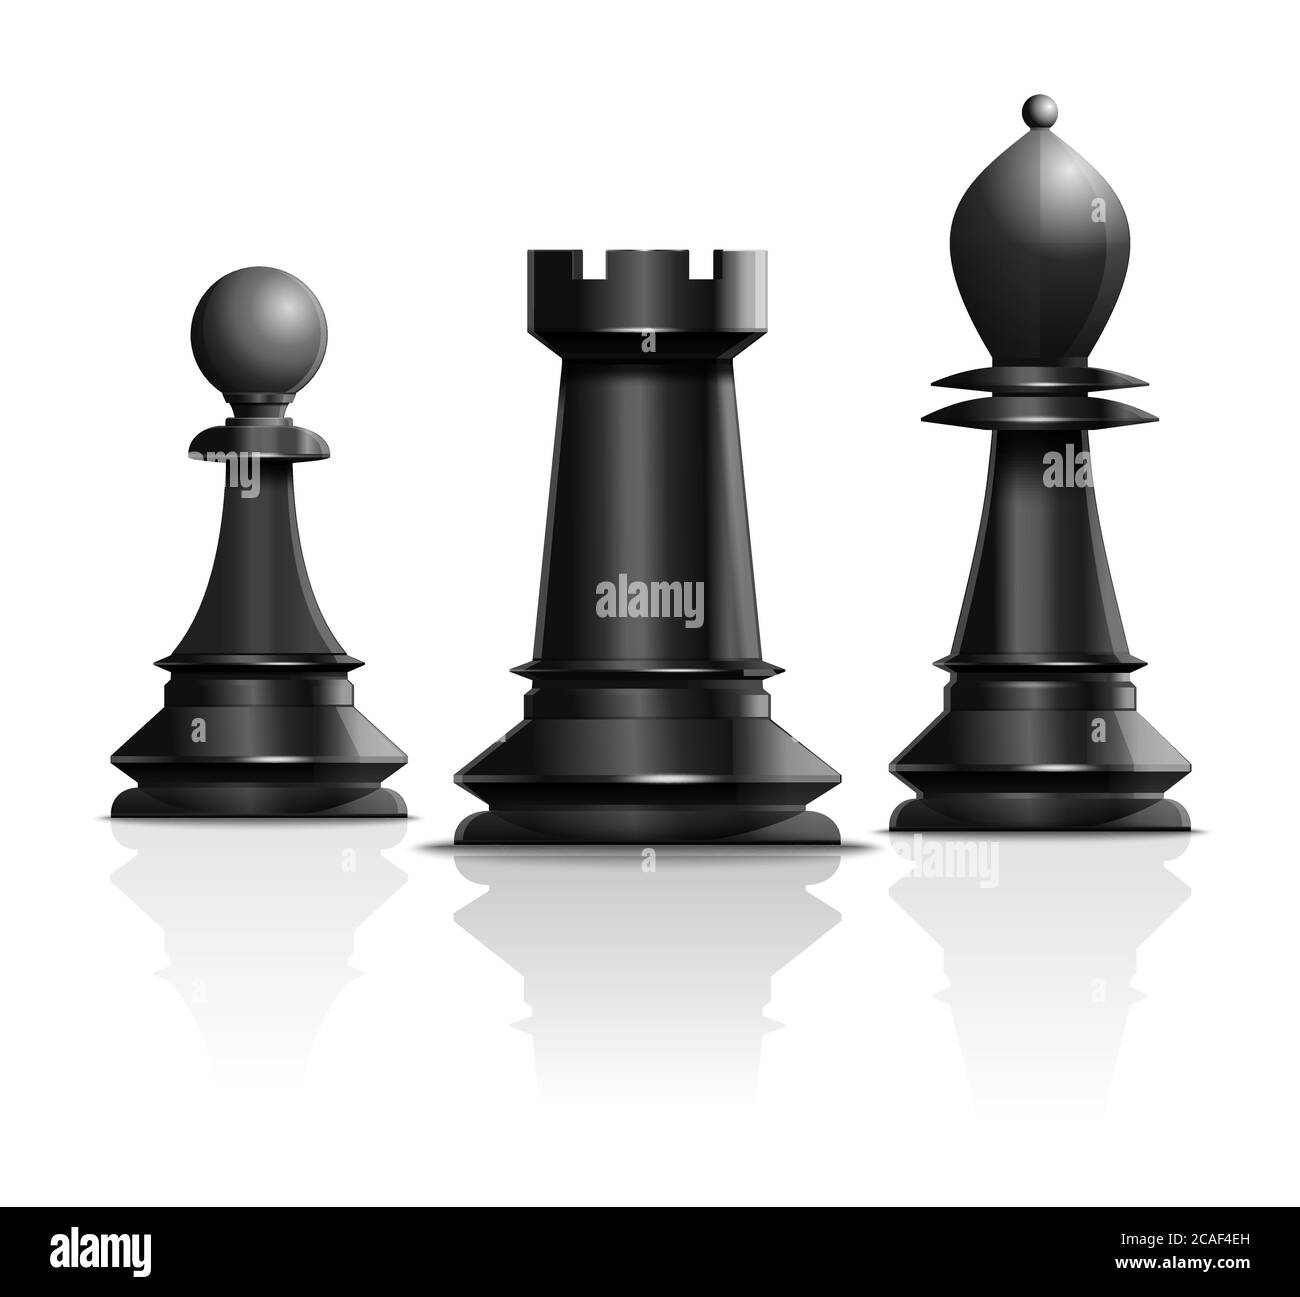 Chess Game Pieces Vector Icons Set Stock Illustration - Download Image Now  - Bishop - Chess Piece, Board Game, Brown - iStock